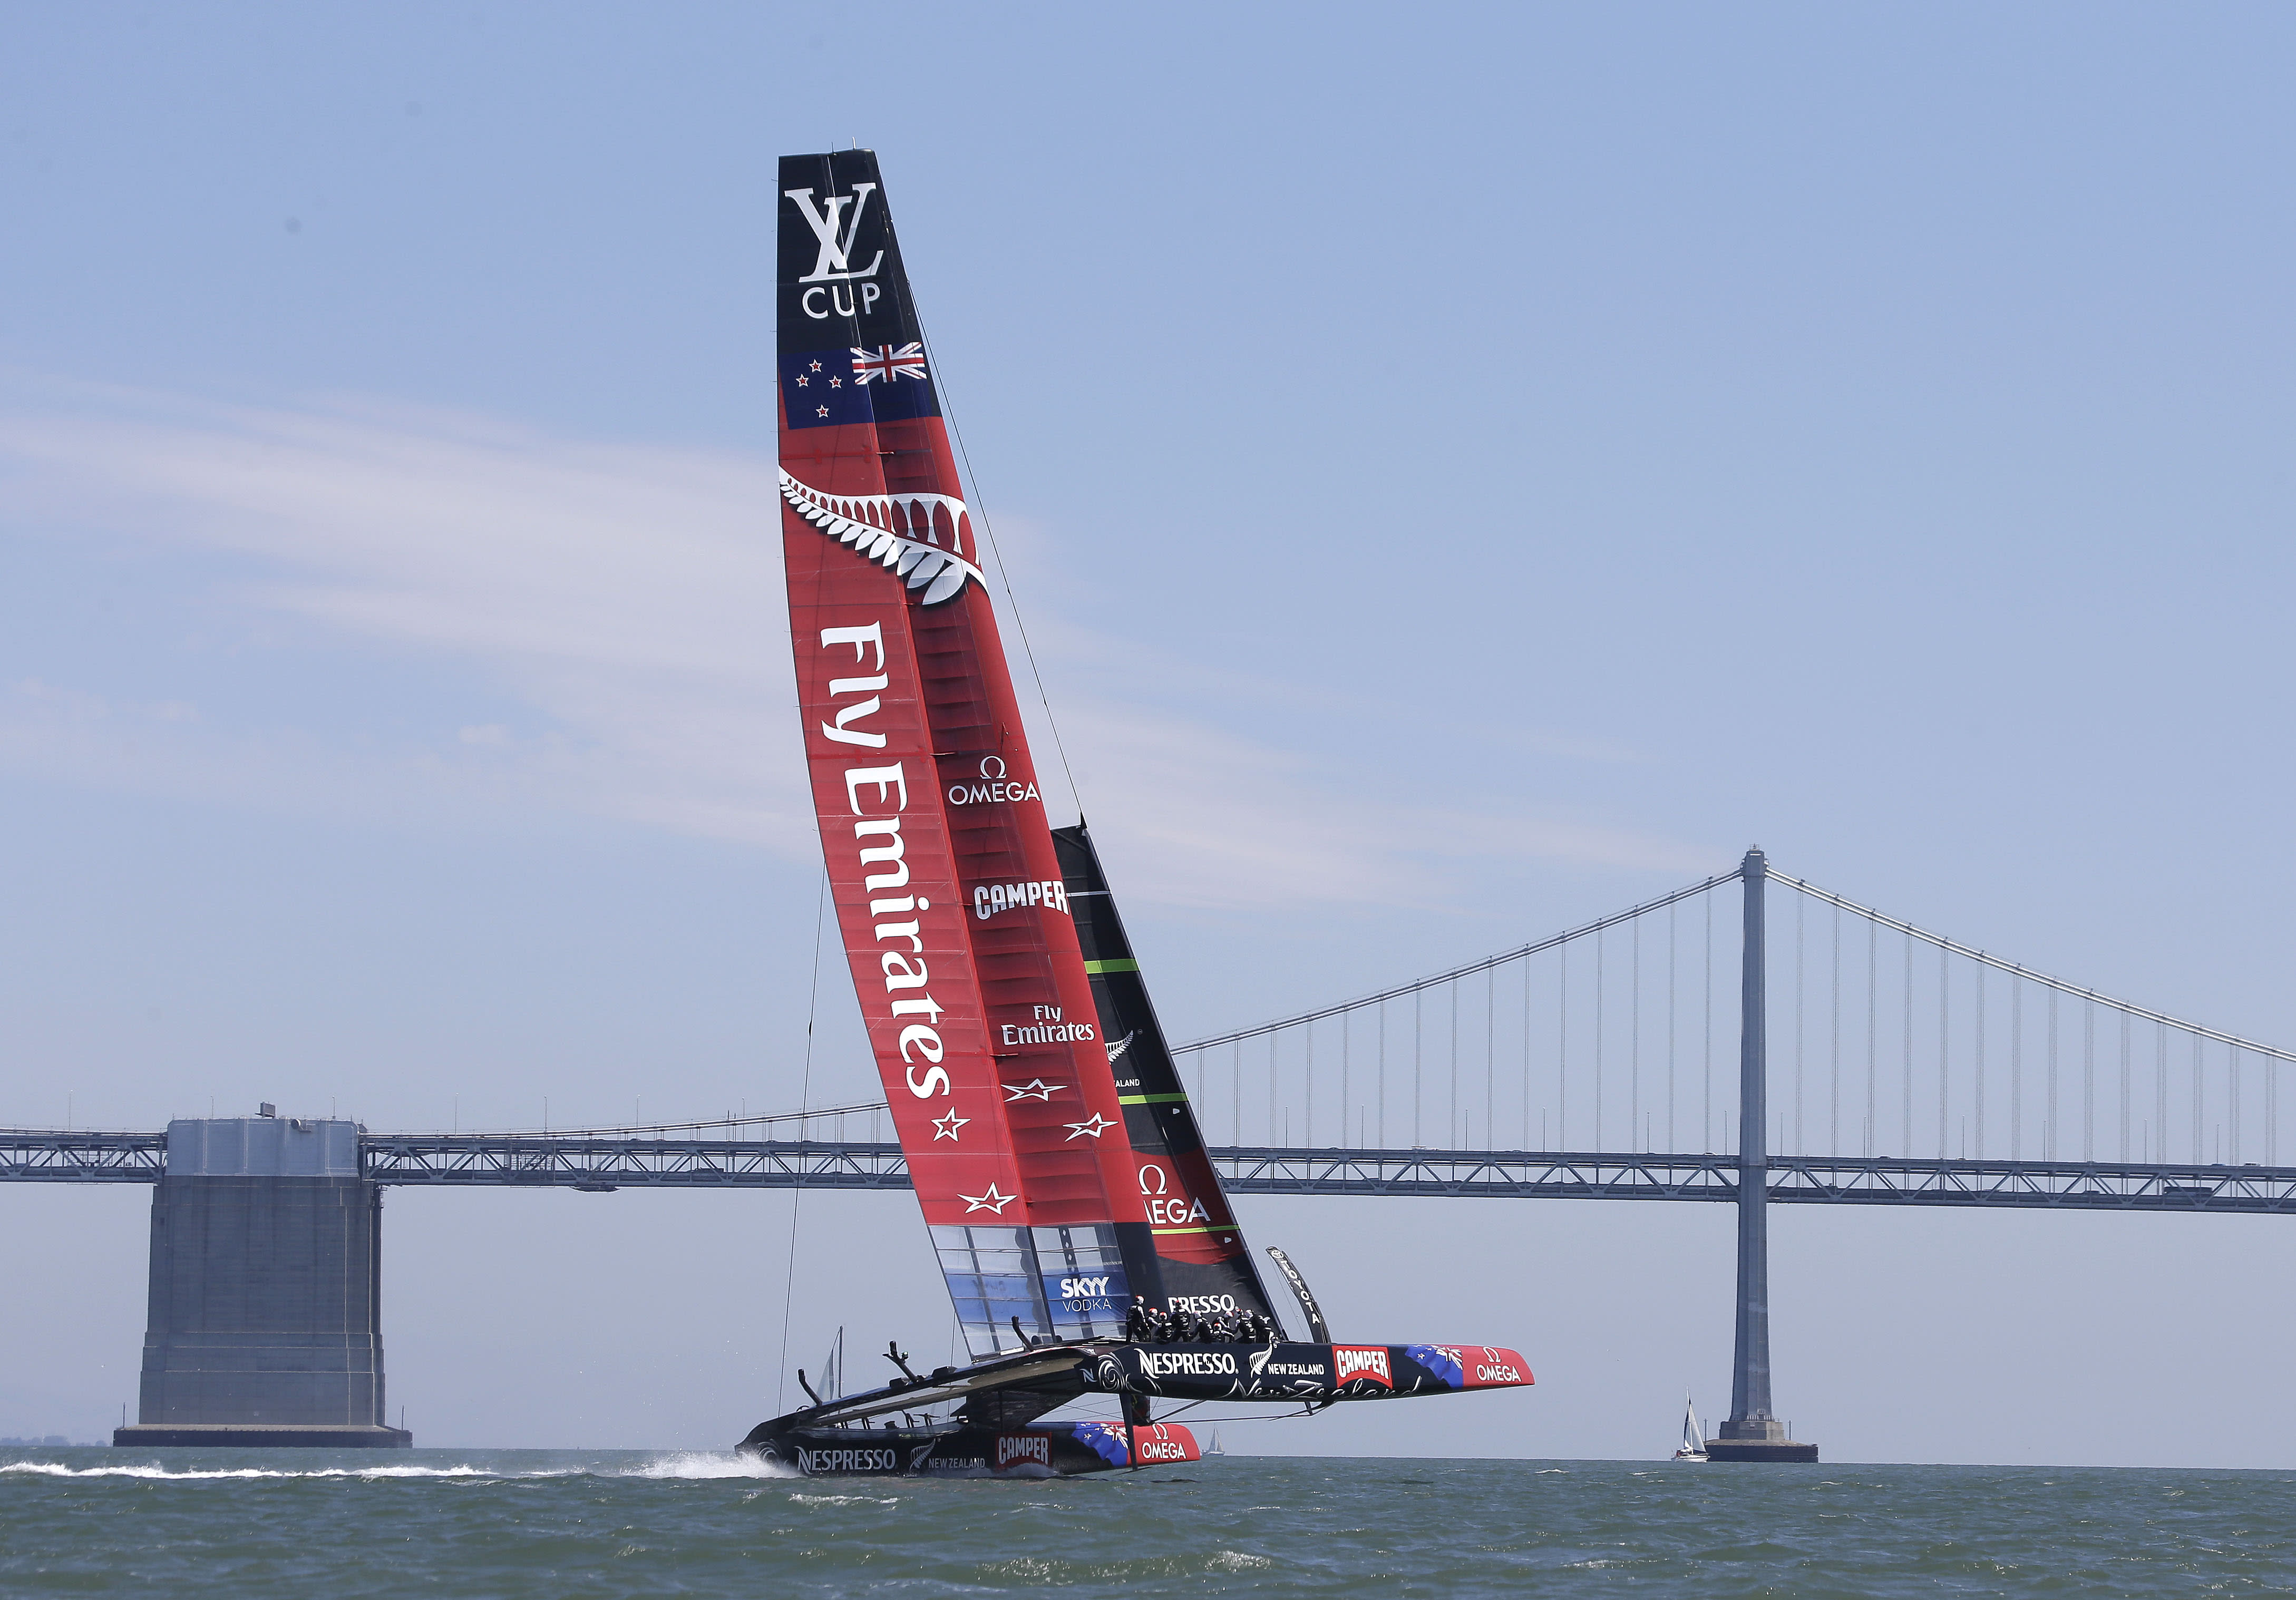 Kiwis take 4-1 lead in Louis Vuitton Cup finals